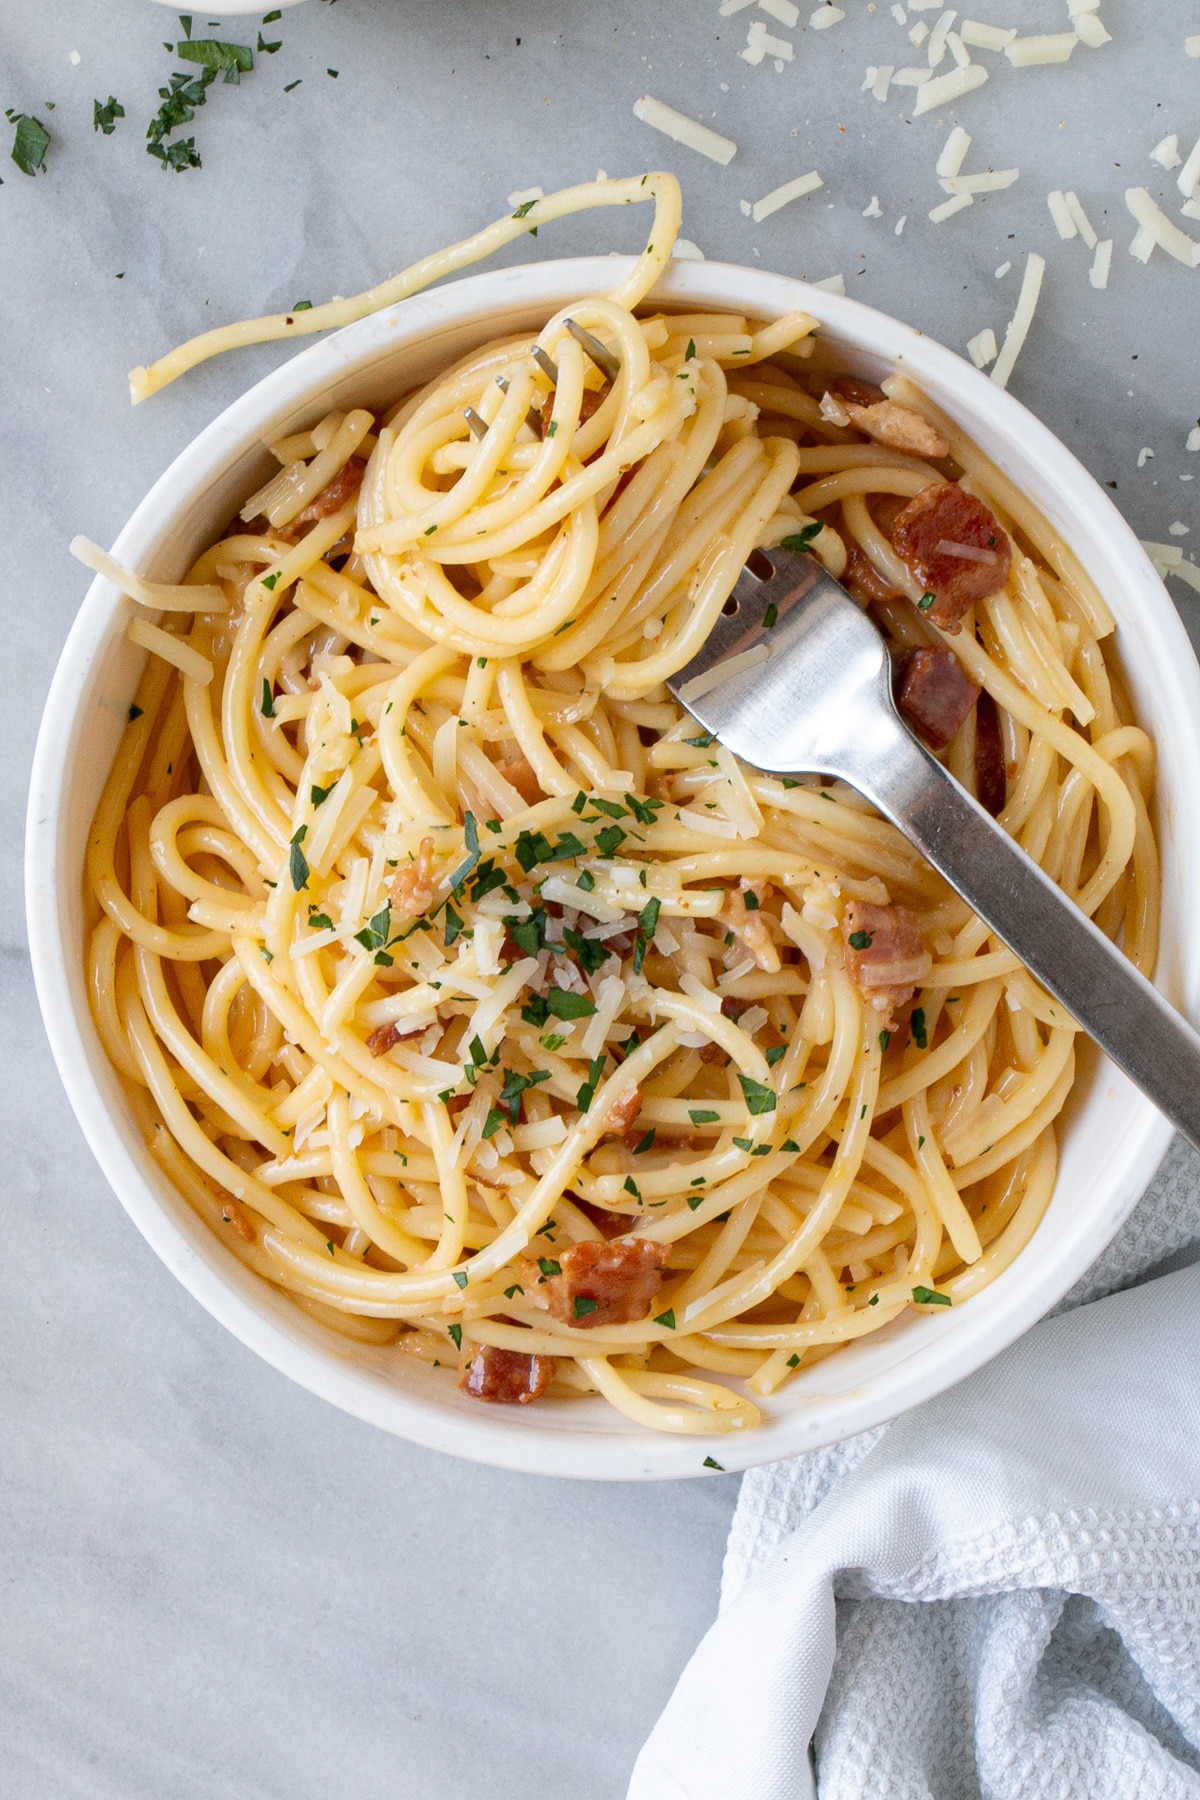 The best Spaghetti Carbonara in a white bowl with parmesan shreds and chopped parsley in small bowls and sprinkled on top.